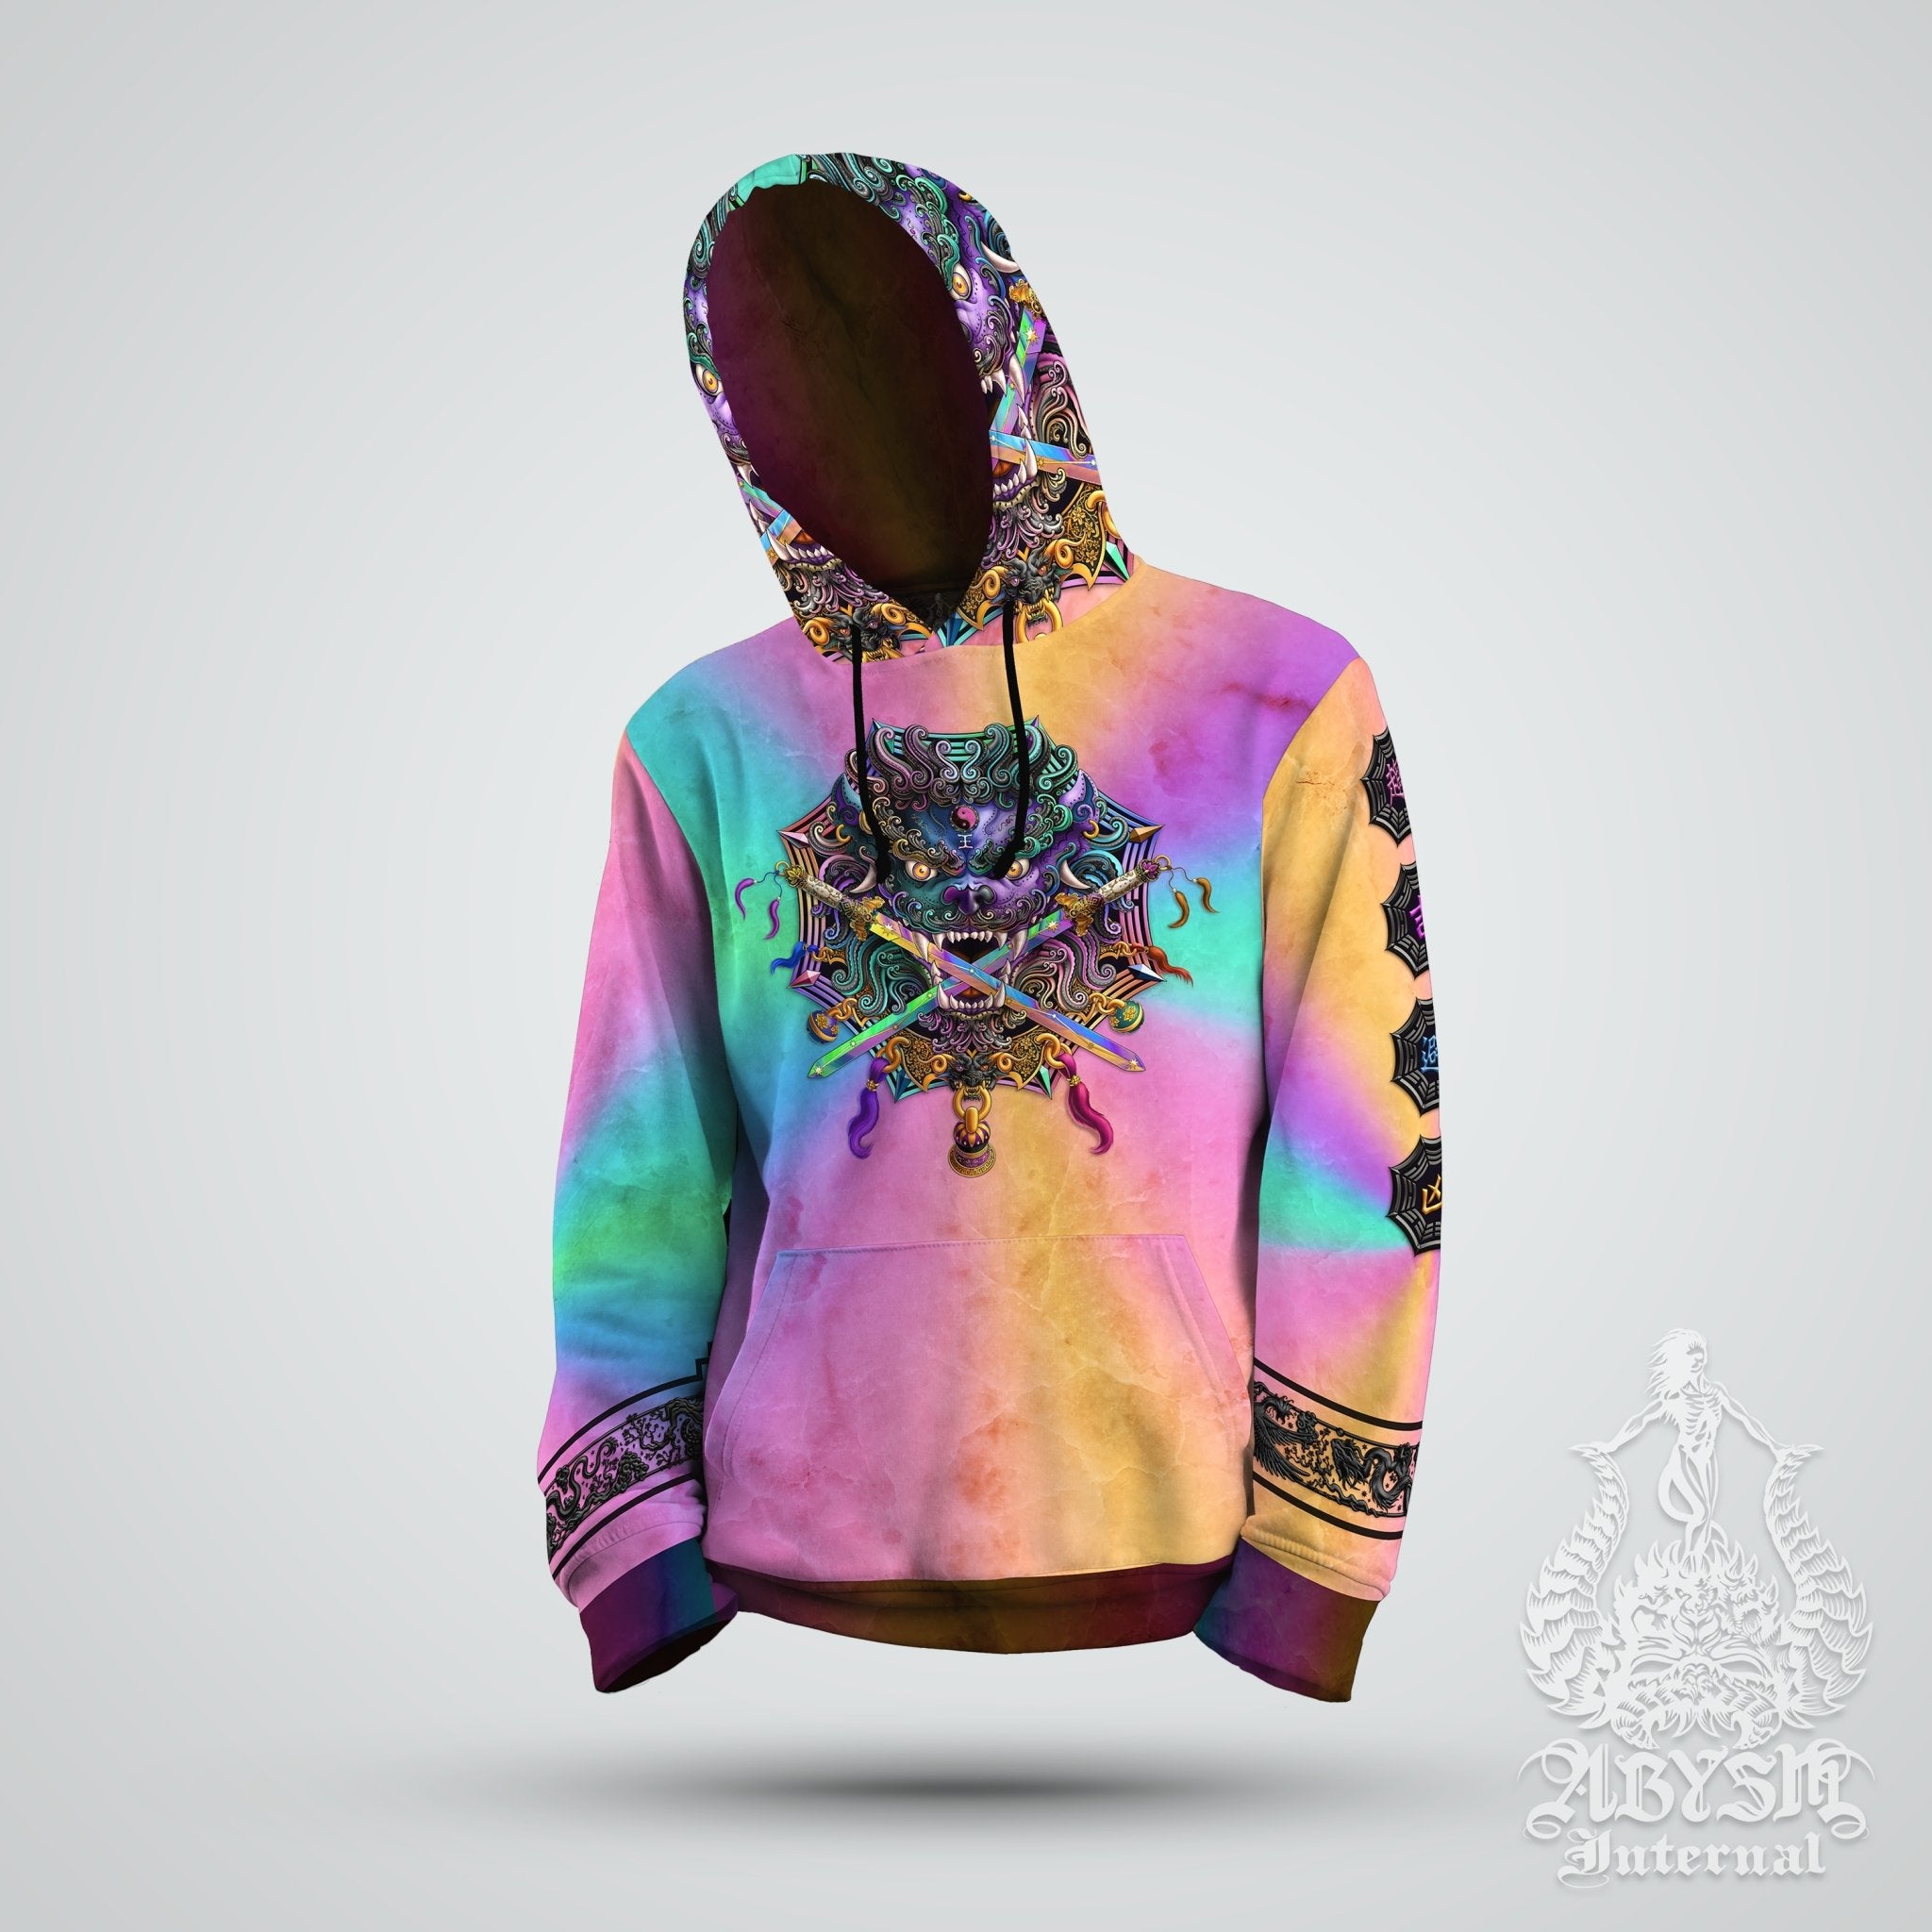 Lion Hoodie, Skater Rave Outfit, Chinese Streetwear, Taiwan Sword Lion, Asian Art Apparel, Alternative Clothing, Unisex - Holographic Pastel Punk Black - Abysm Internal